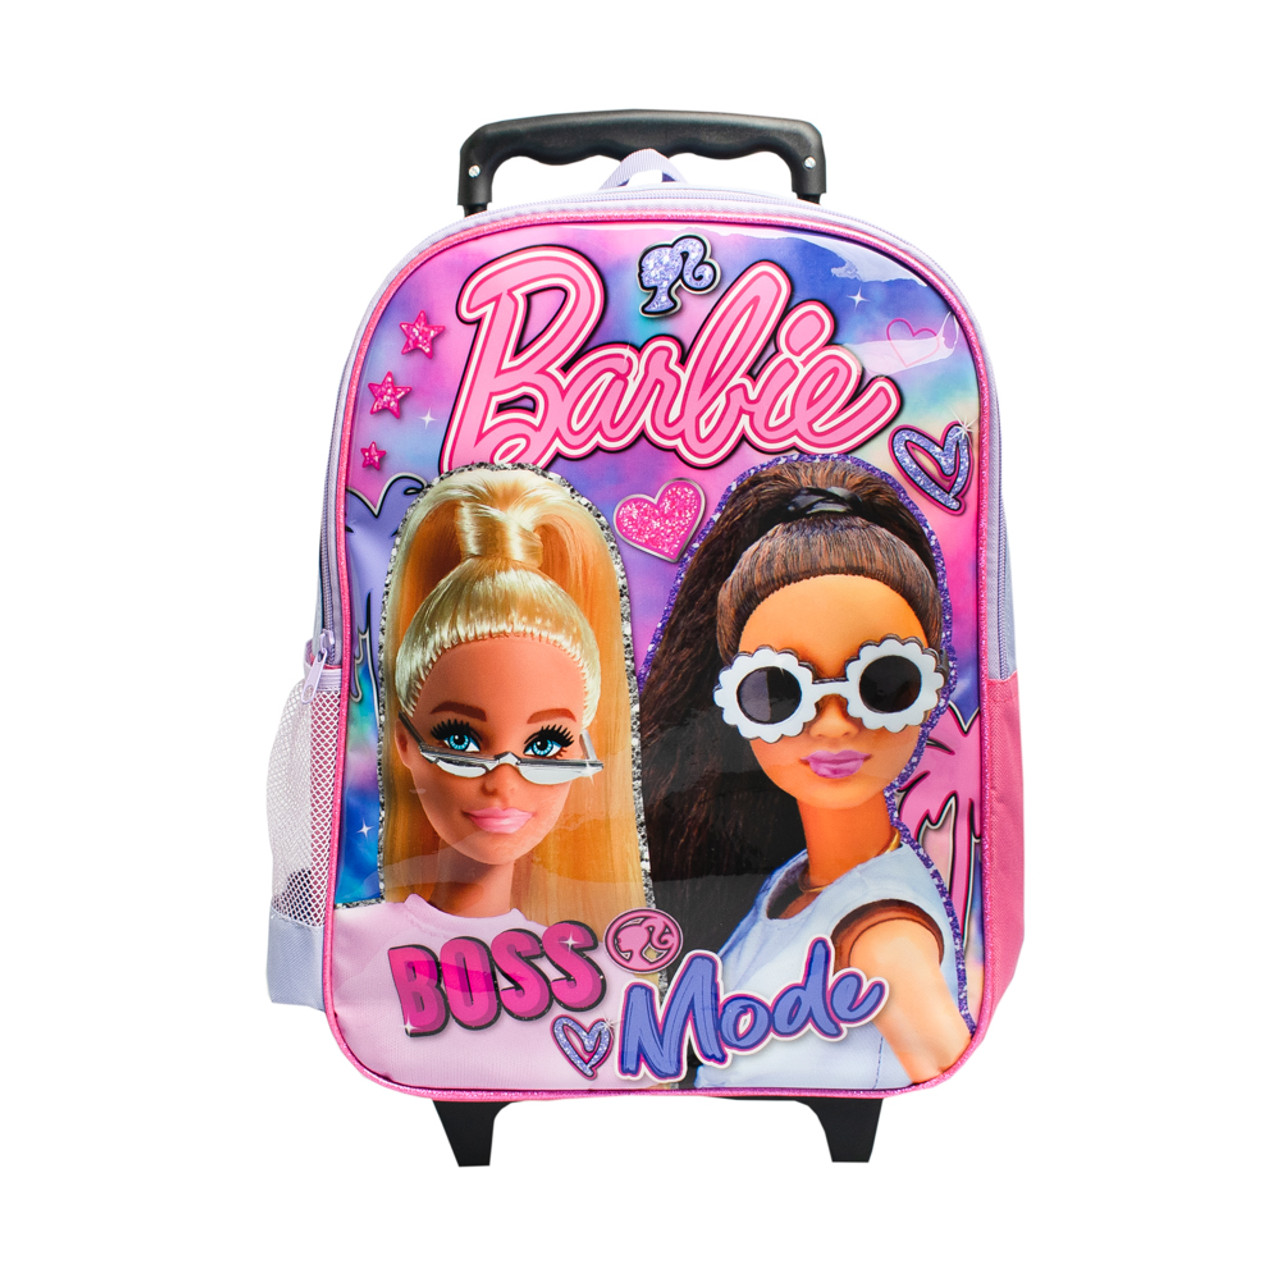 Easybags BARBIE-20 Small Travel Bag - Small - Price in India, Reviews,  Ratings & Specifications | Flipkart.com